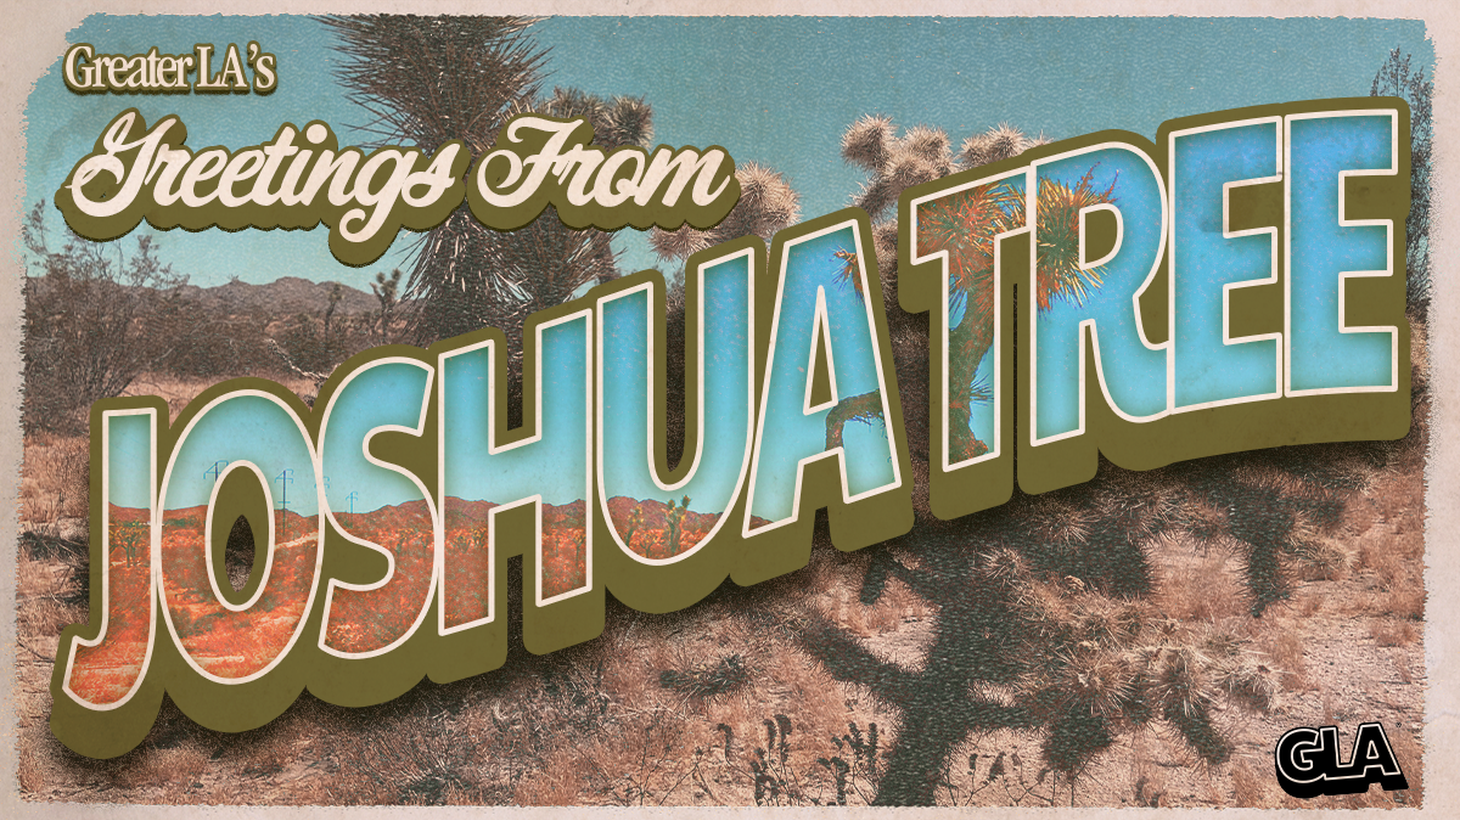 If you love Joshua Tree National Park, you have a little old lady from Pasadena to thank, Minerva Hamilton Hoyt.